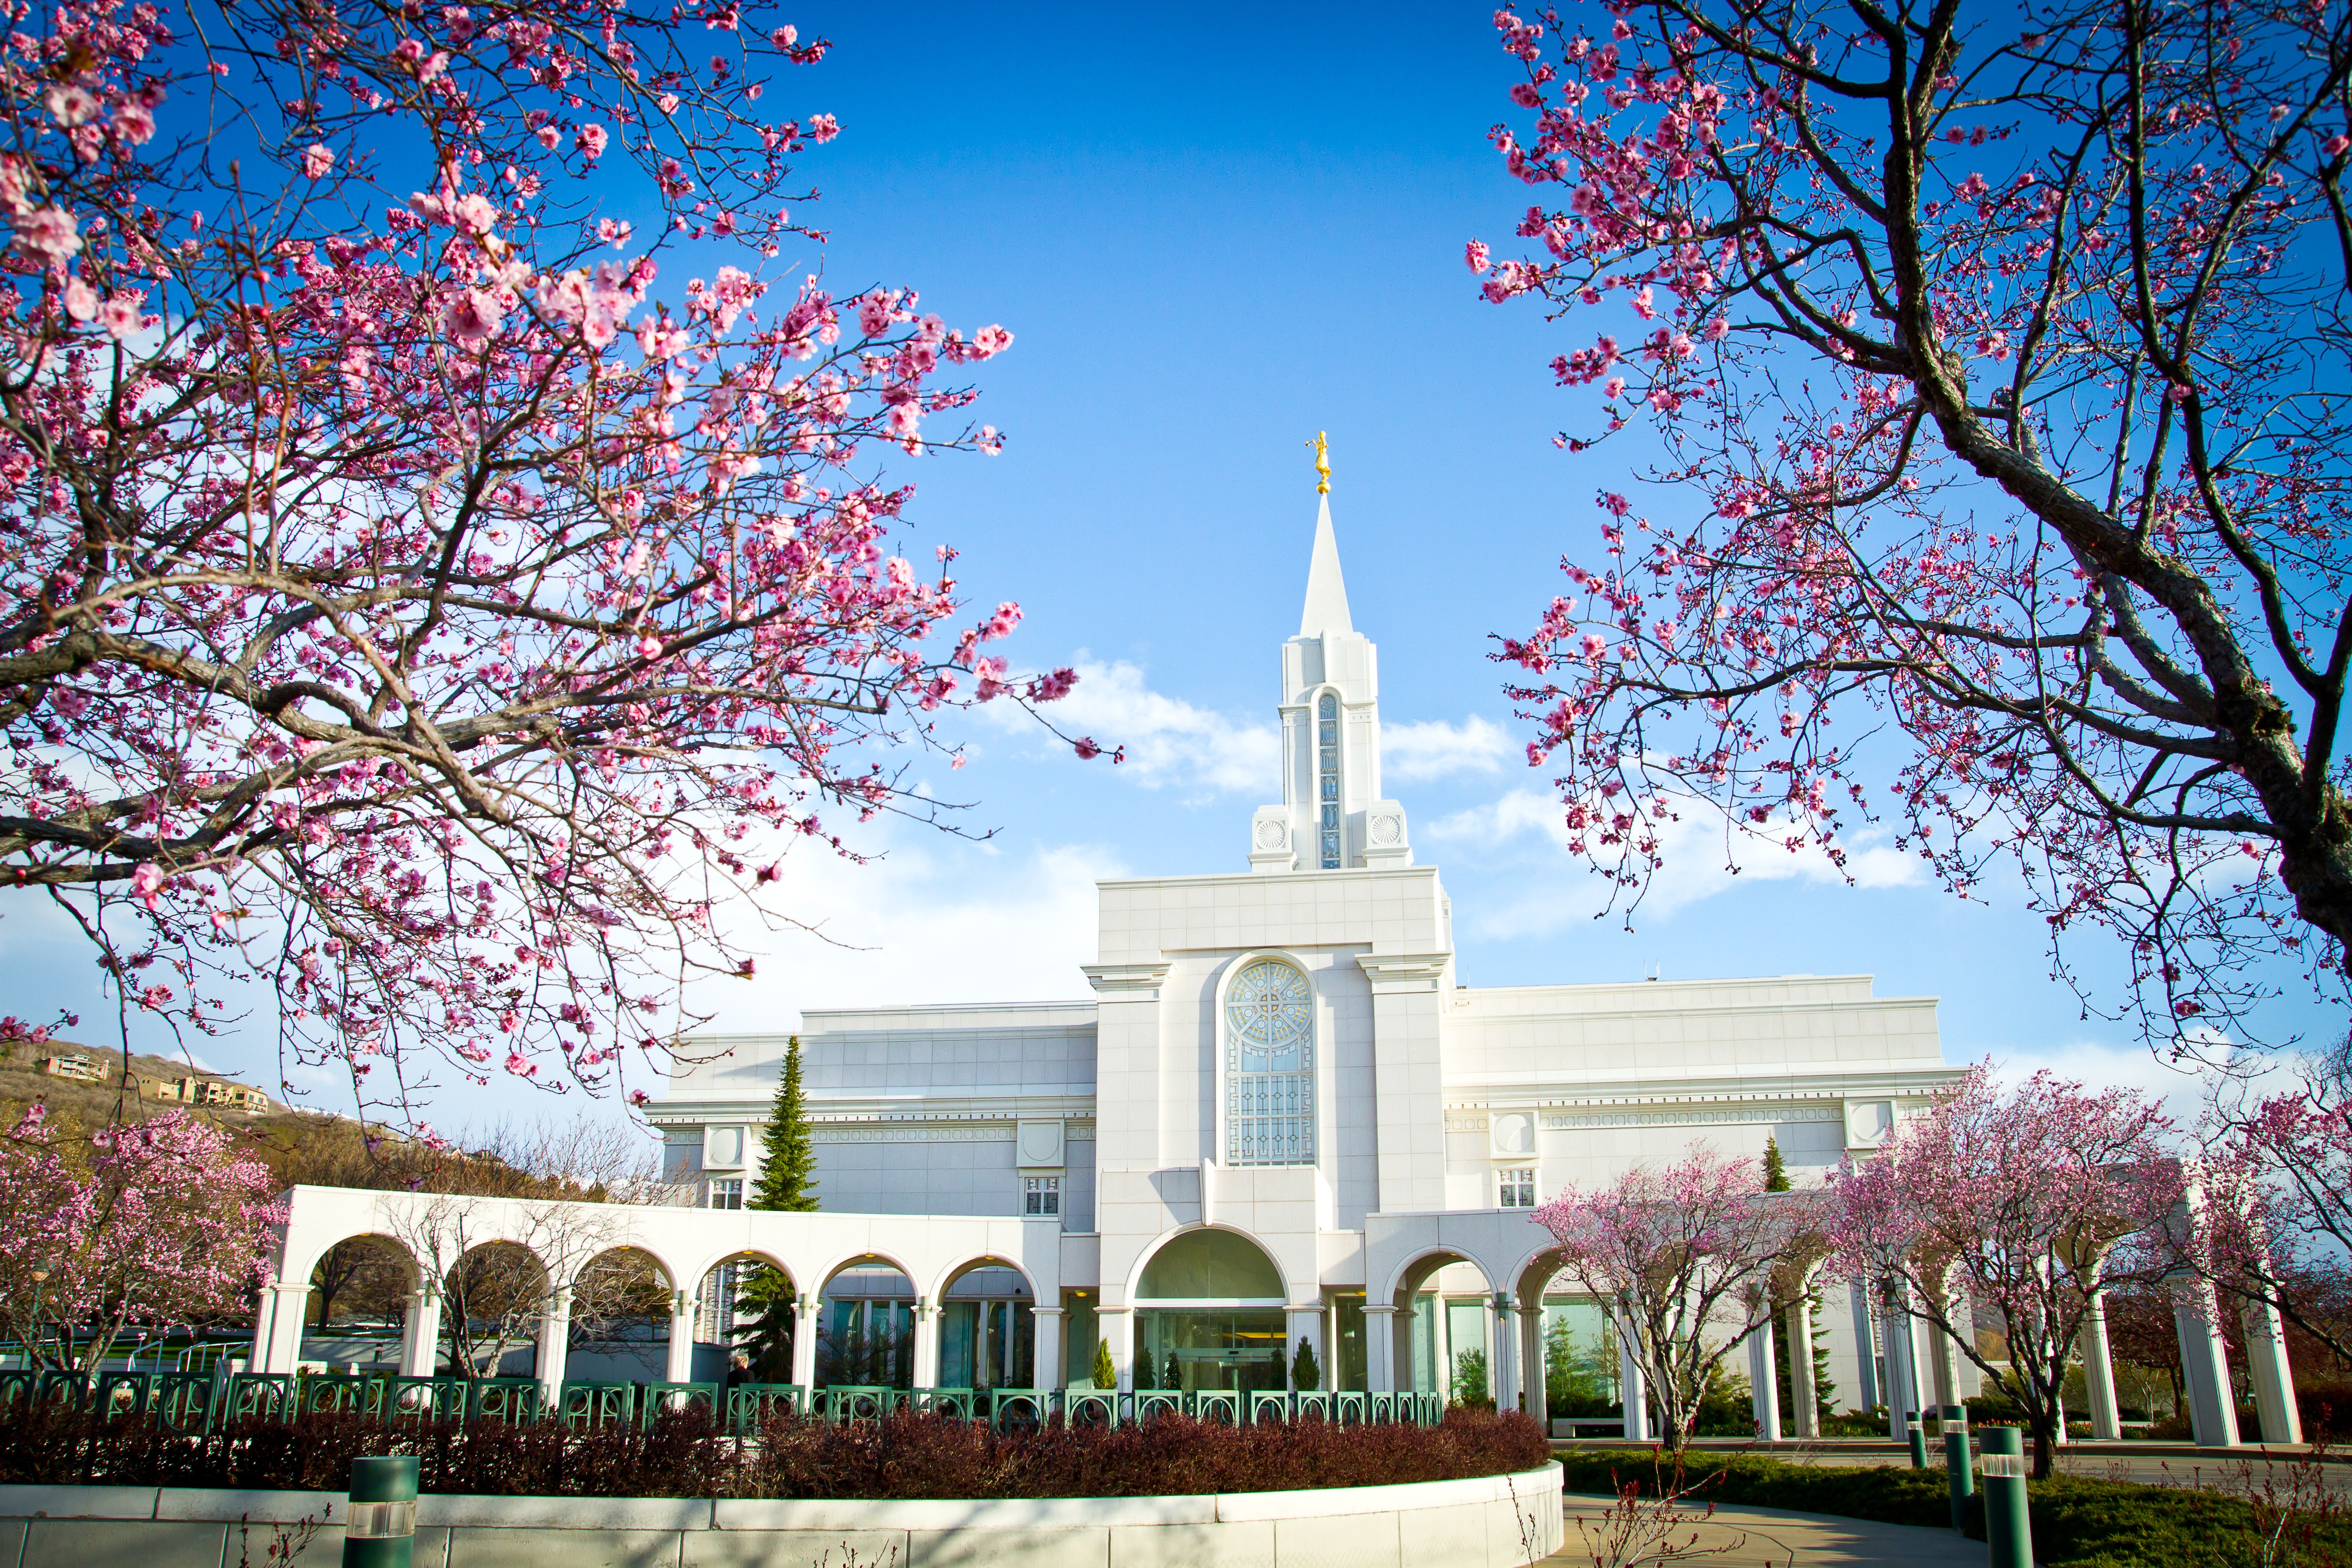 The exterior of the Bountiful Utah Temple, A white building with sections of various heights and a multilevel tower in the center.